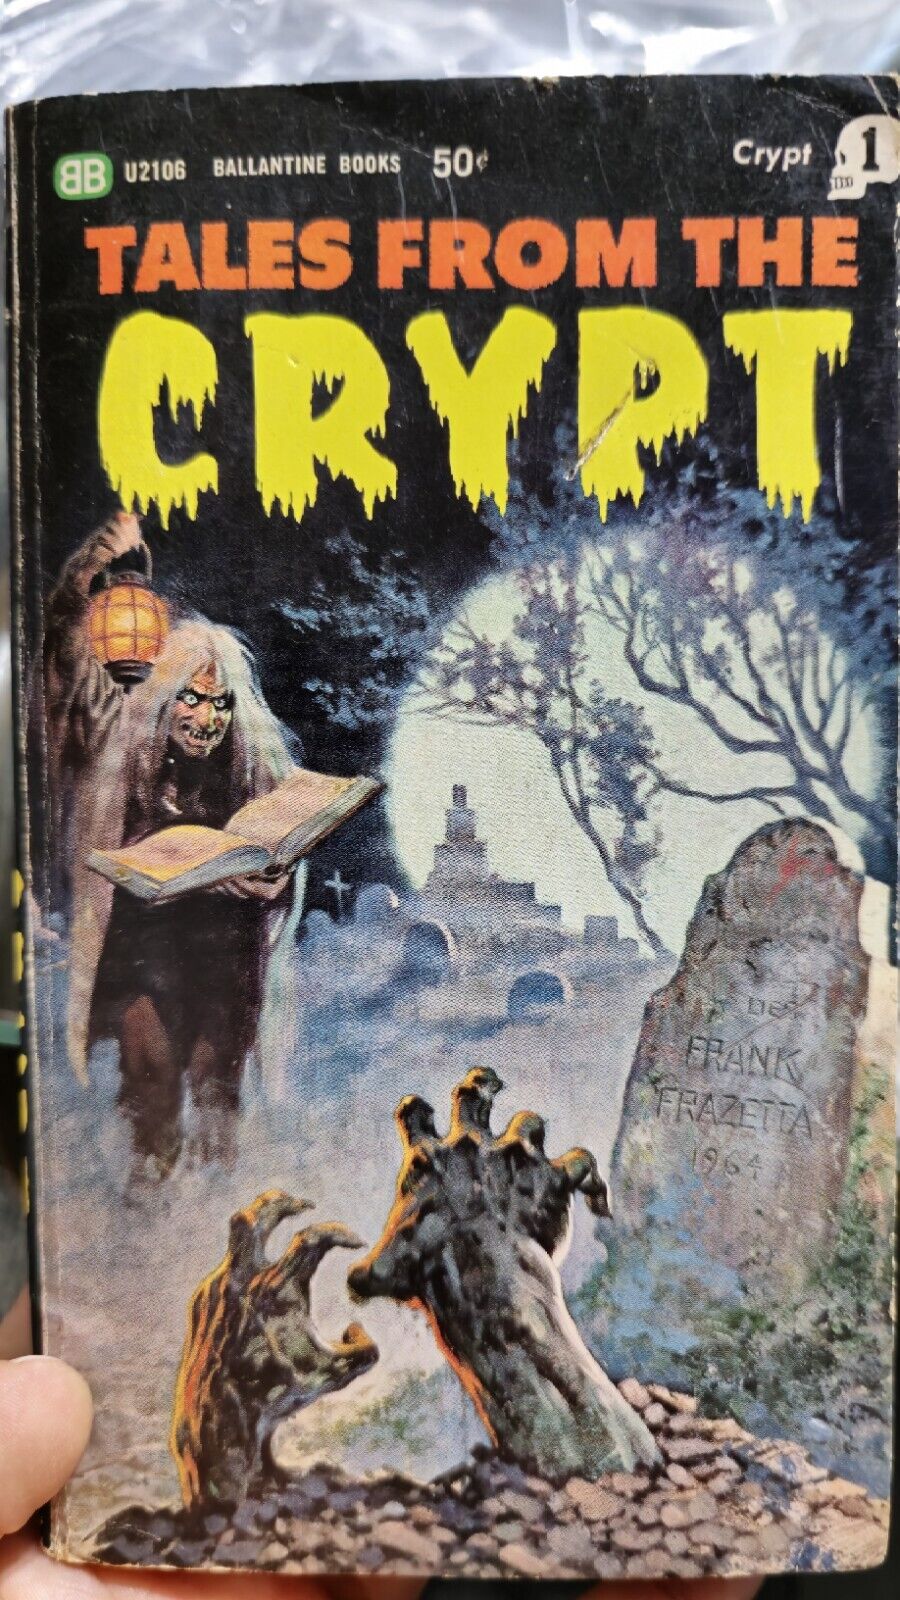 Tales from the Crypt - No1